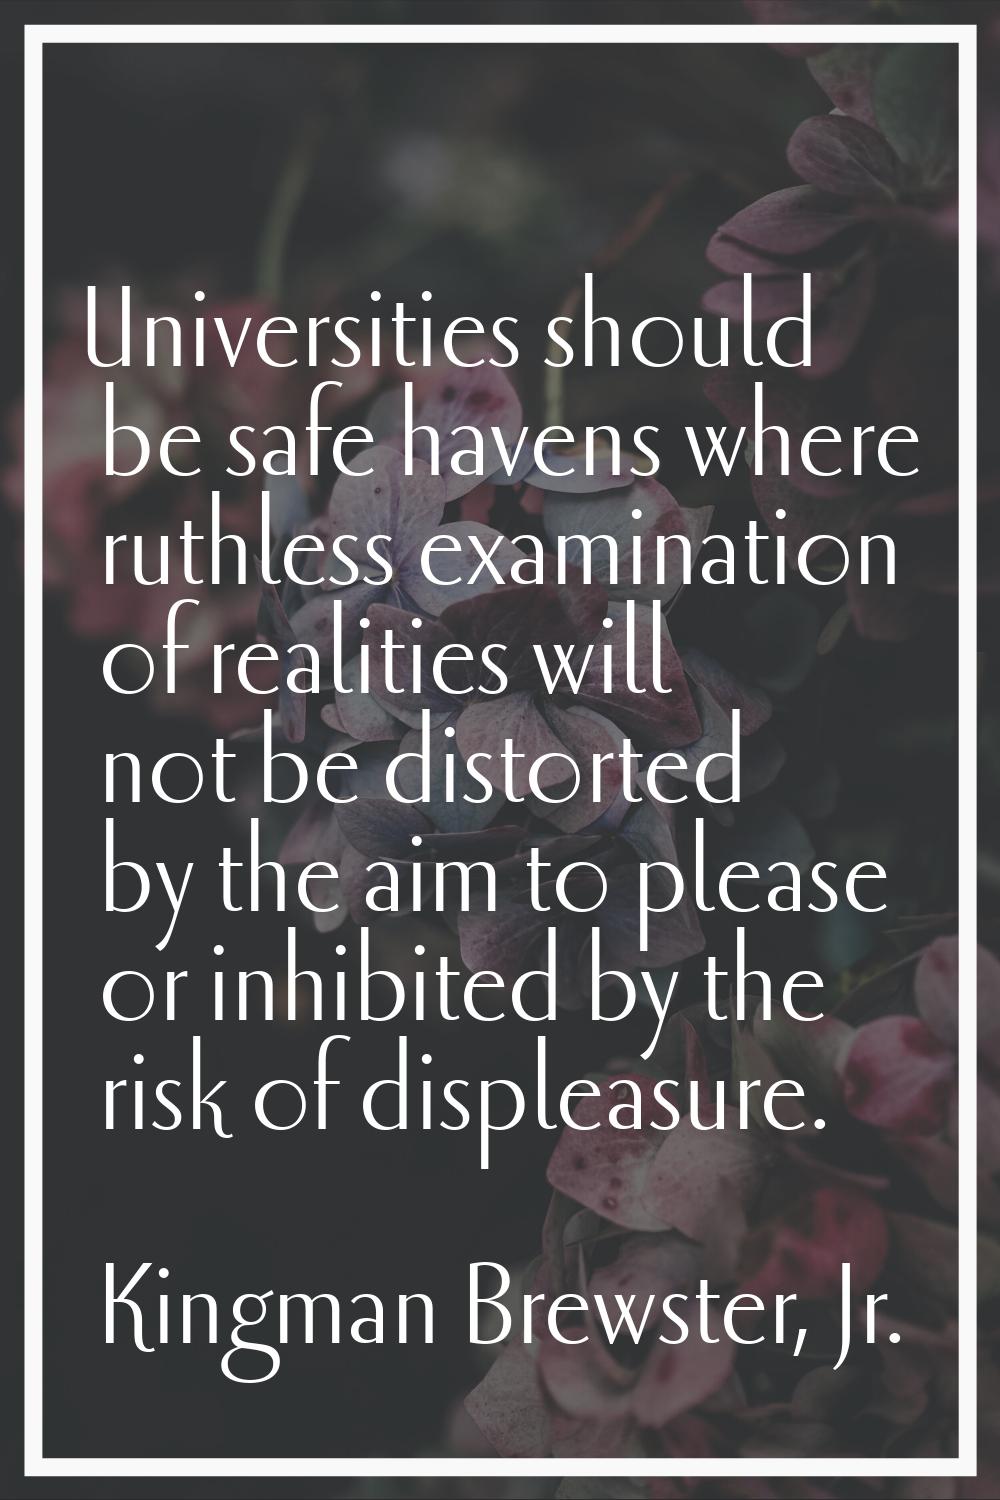 Universities should be safe havens where ruthless examination of realities will not be distorted by